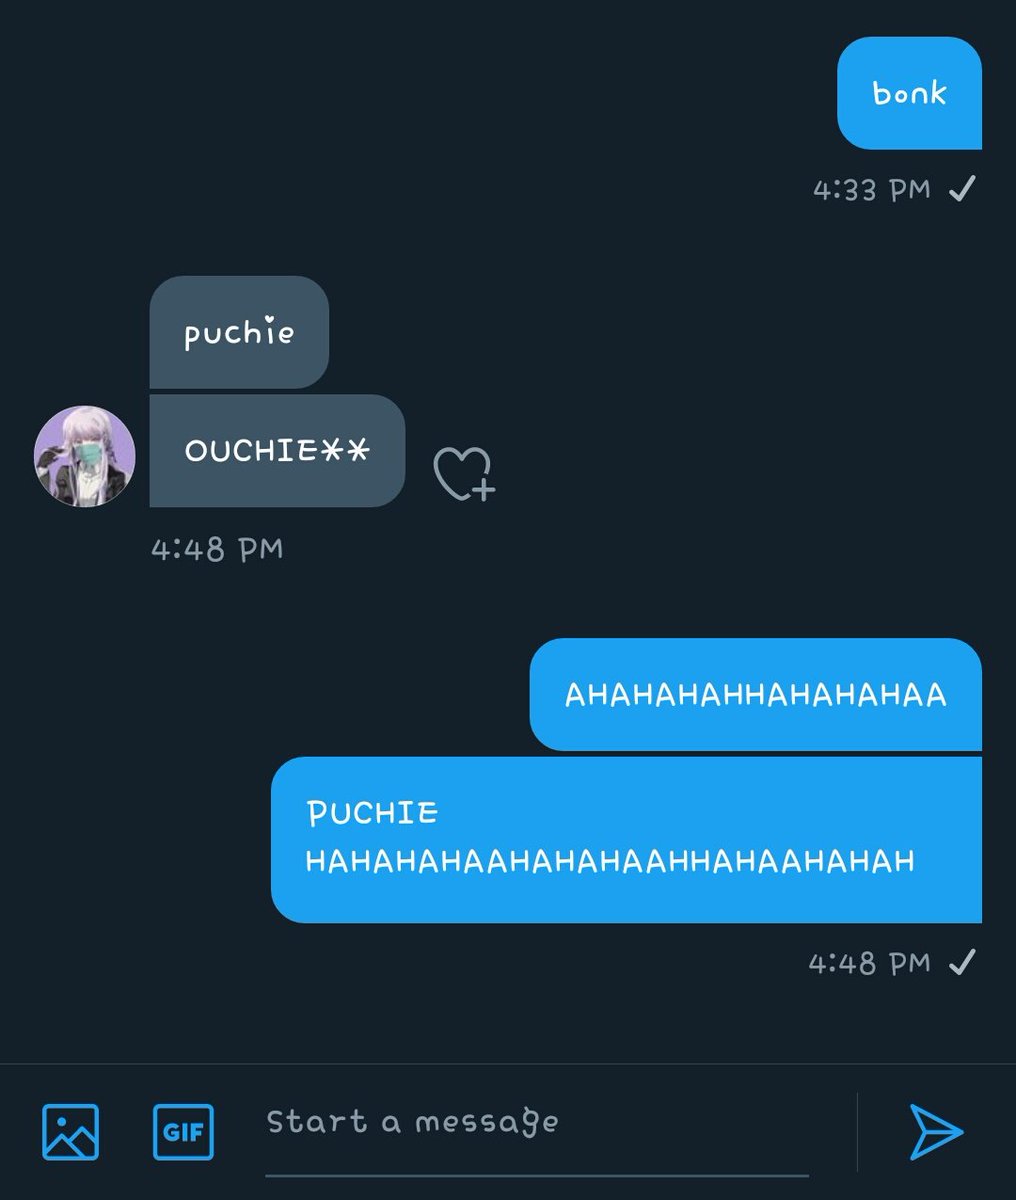 "puchie"(THIS ONE MADE ME LAUGH MORE COMPARED TO OTHER TYPOS IDK WHY, PUCHIE JUST SOUNDS SO FUNNY FHSJSHSJSHAKA)